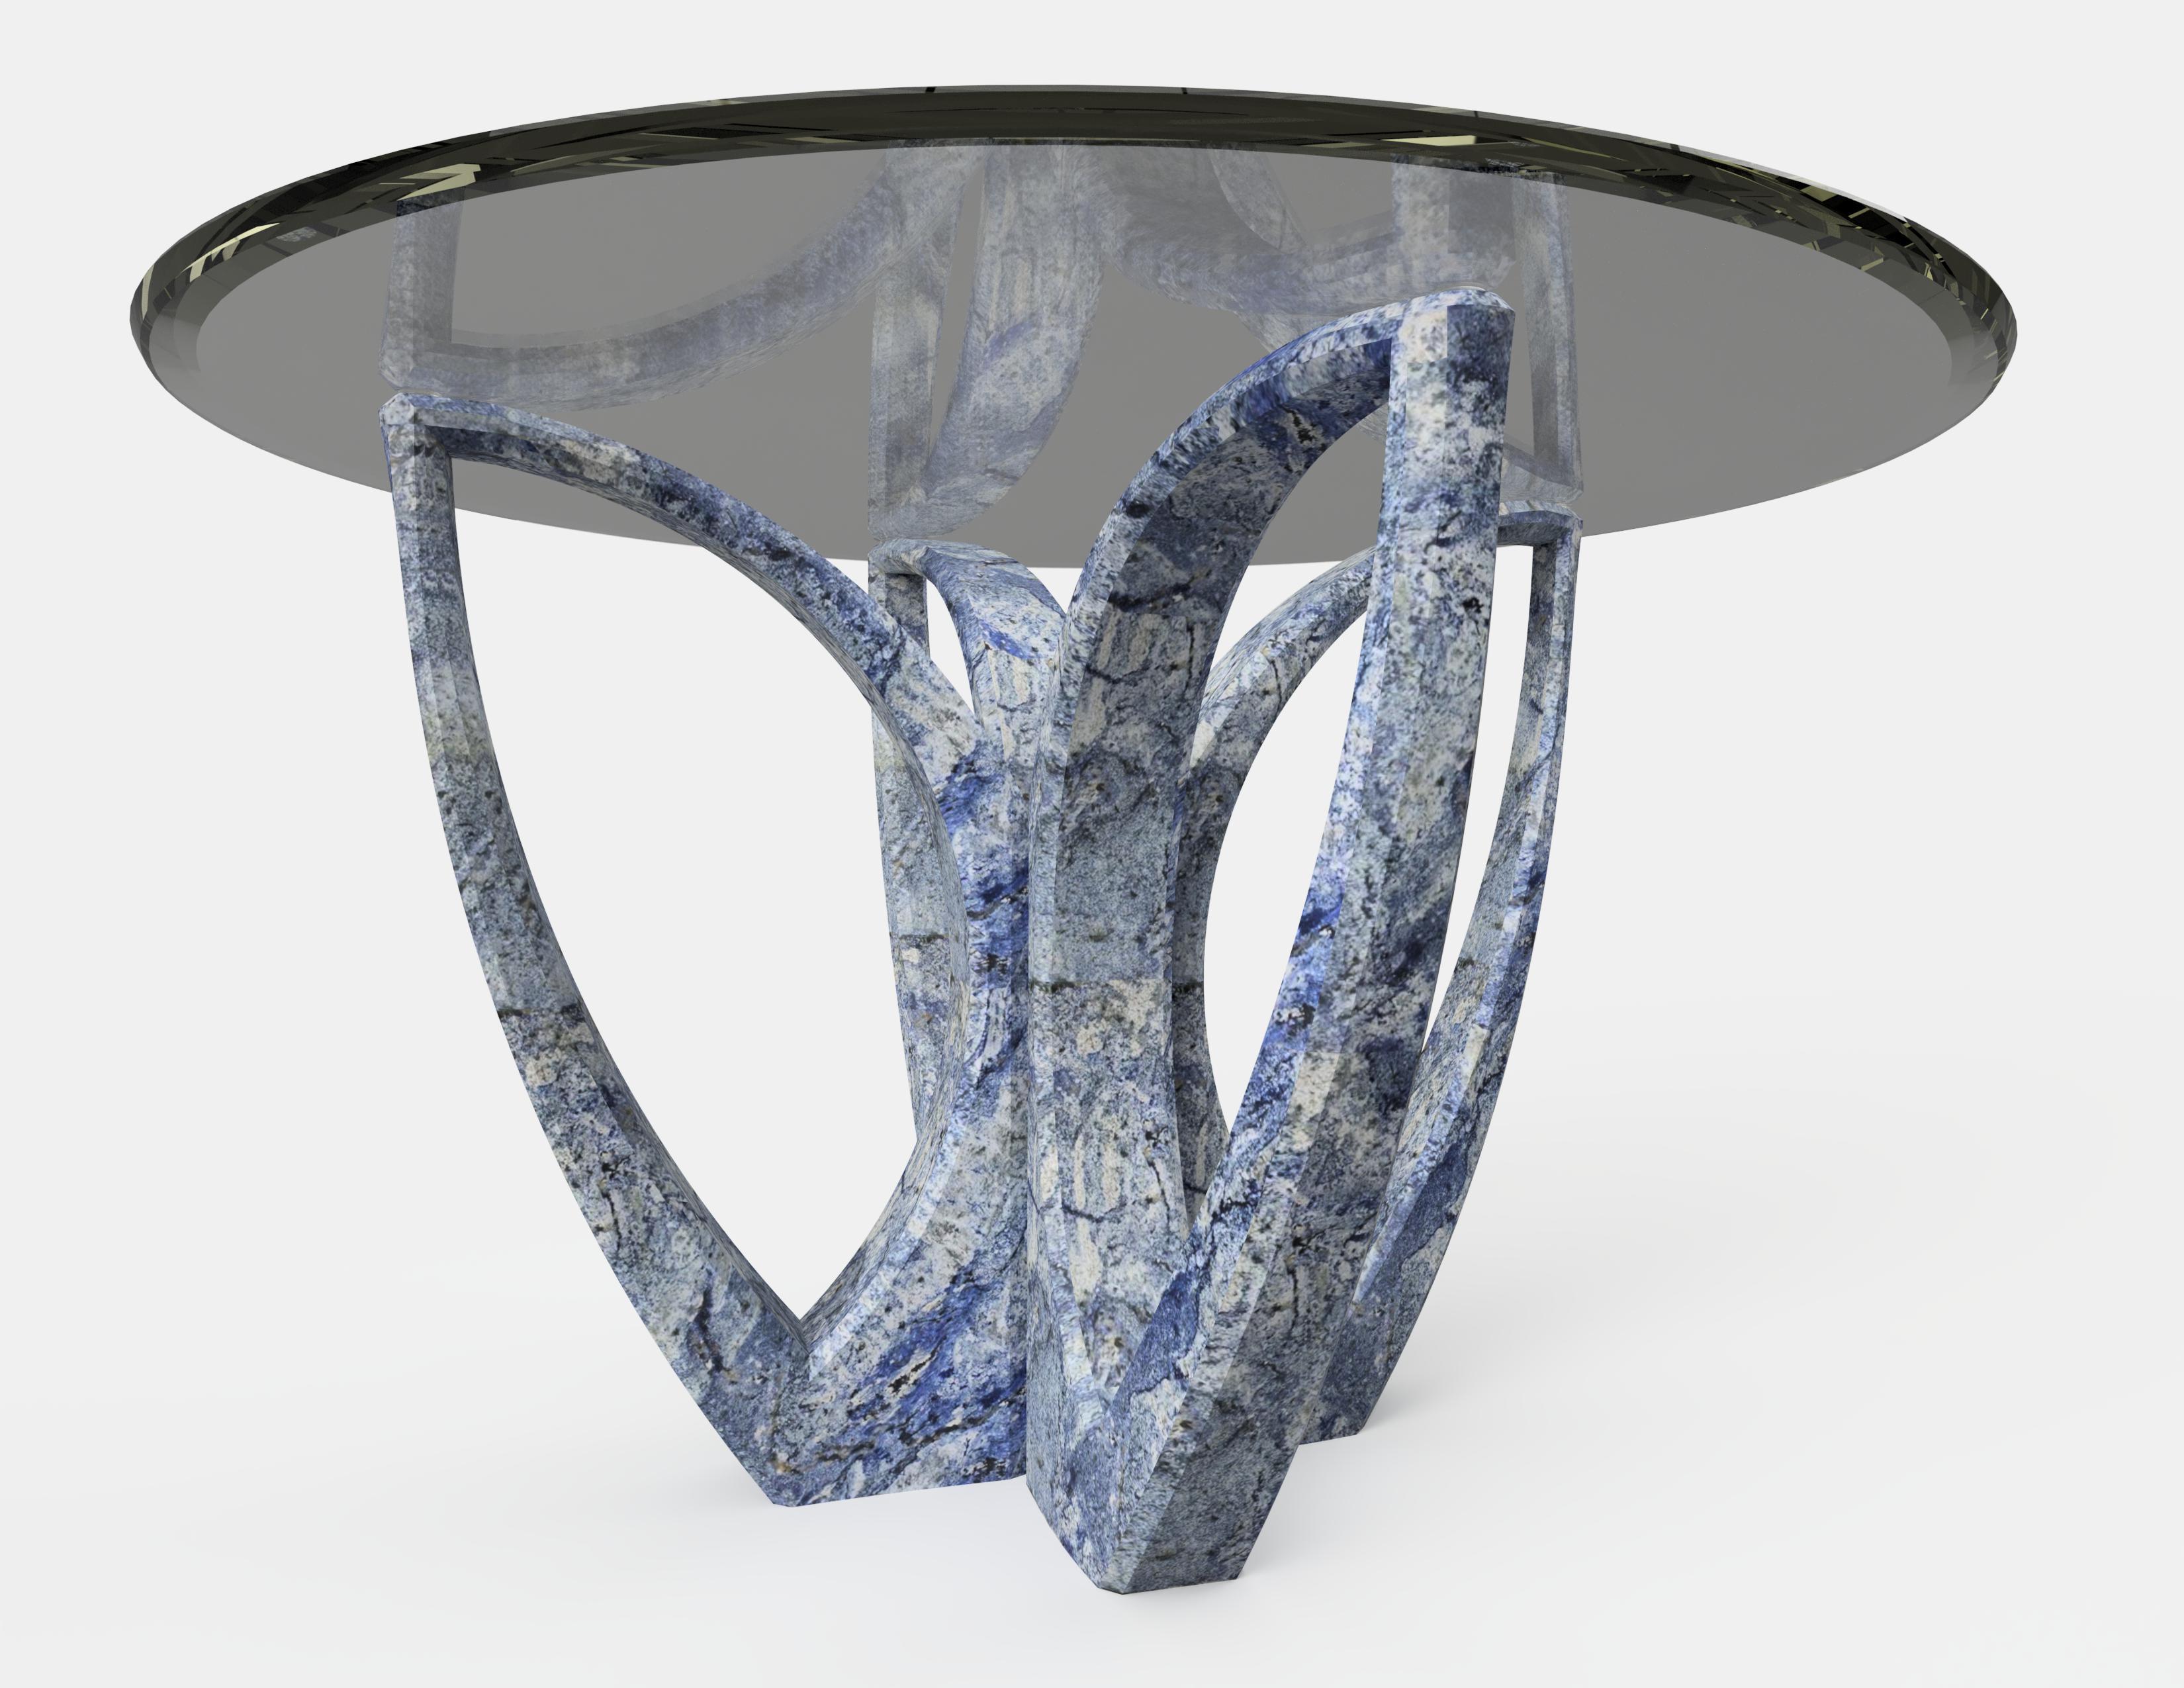 The diamond lotus coffee table, 1 of 1 by Grzegorz Majka
Edition 1 of 1
Dimensions: 47.24 x 47.24 x 29.53 in
Materials: Smoked glass top. Onyx base. 


The Diamond collection proves that everything is possible. It goes beyond the stereotypical